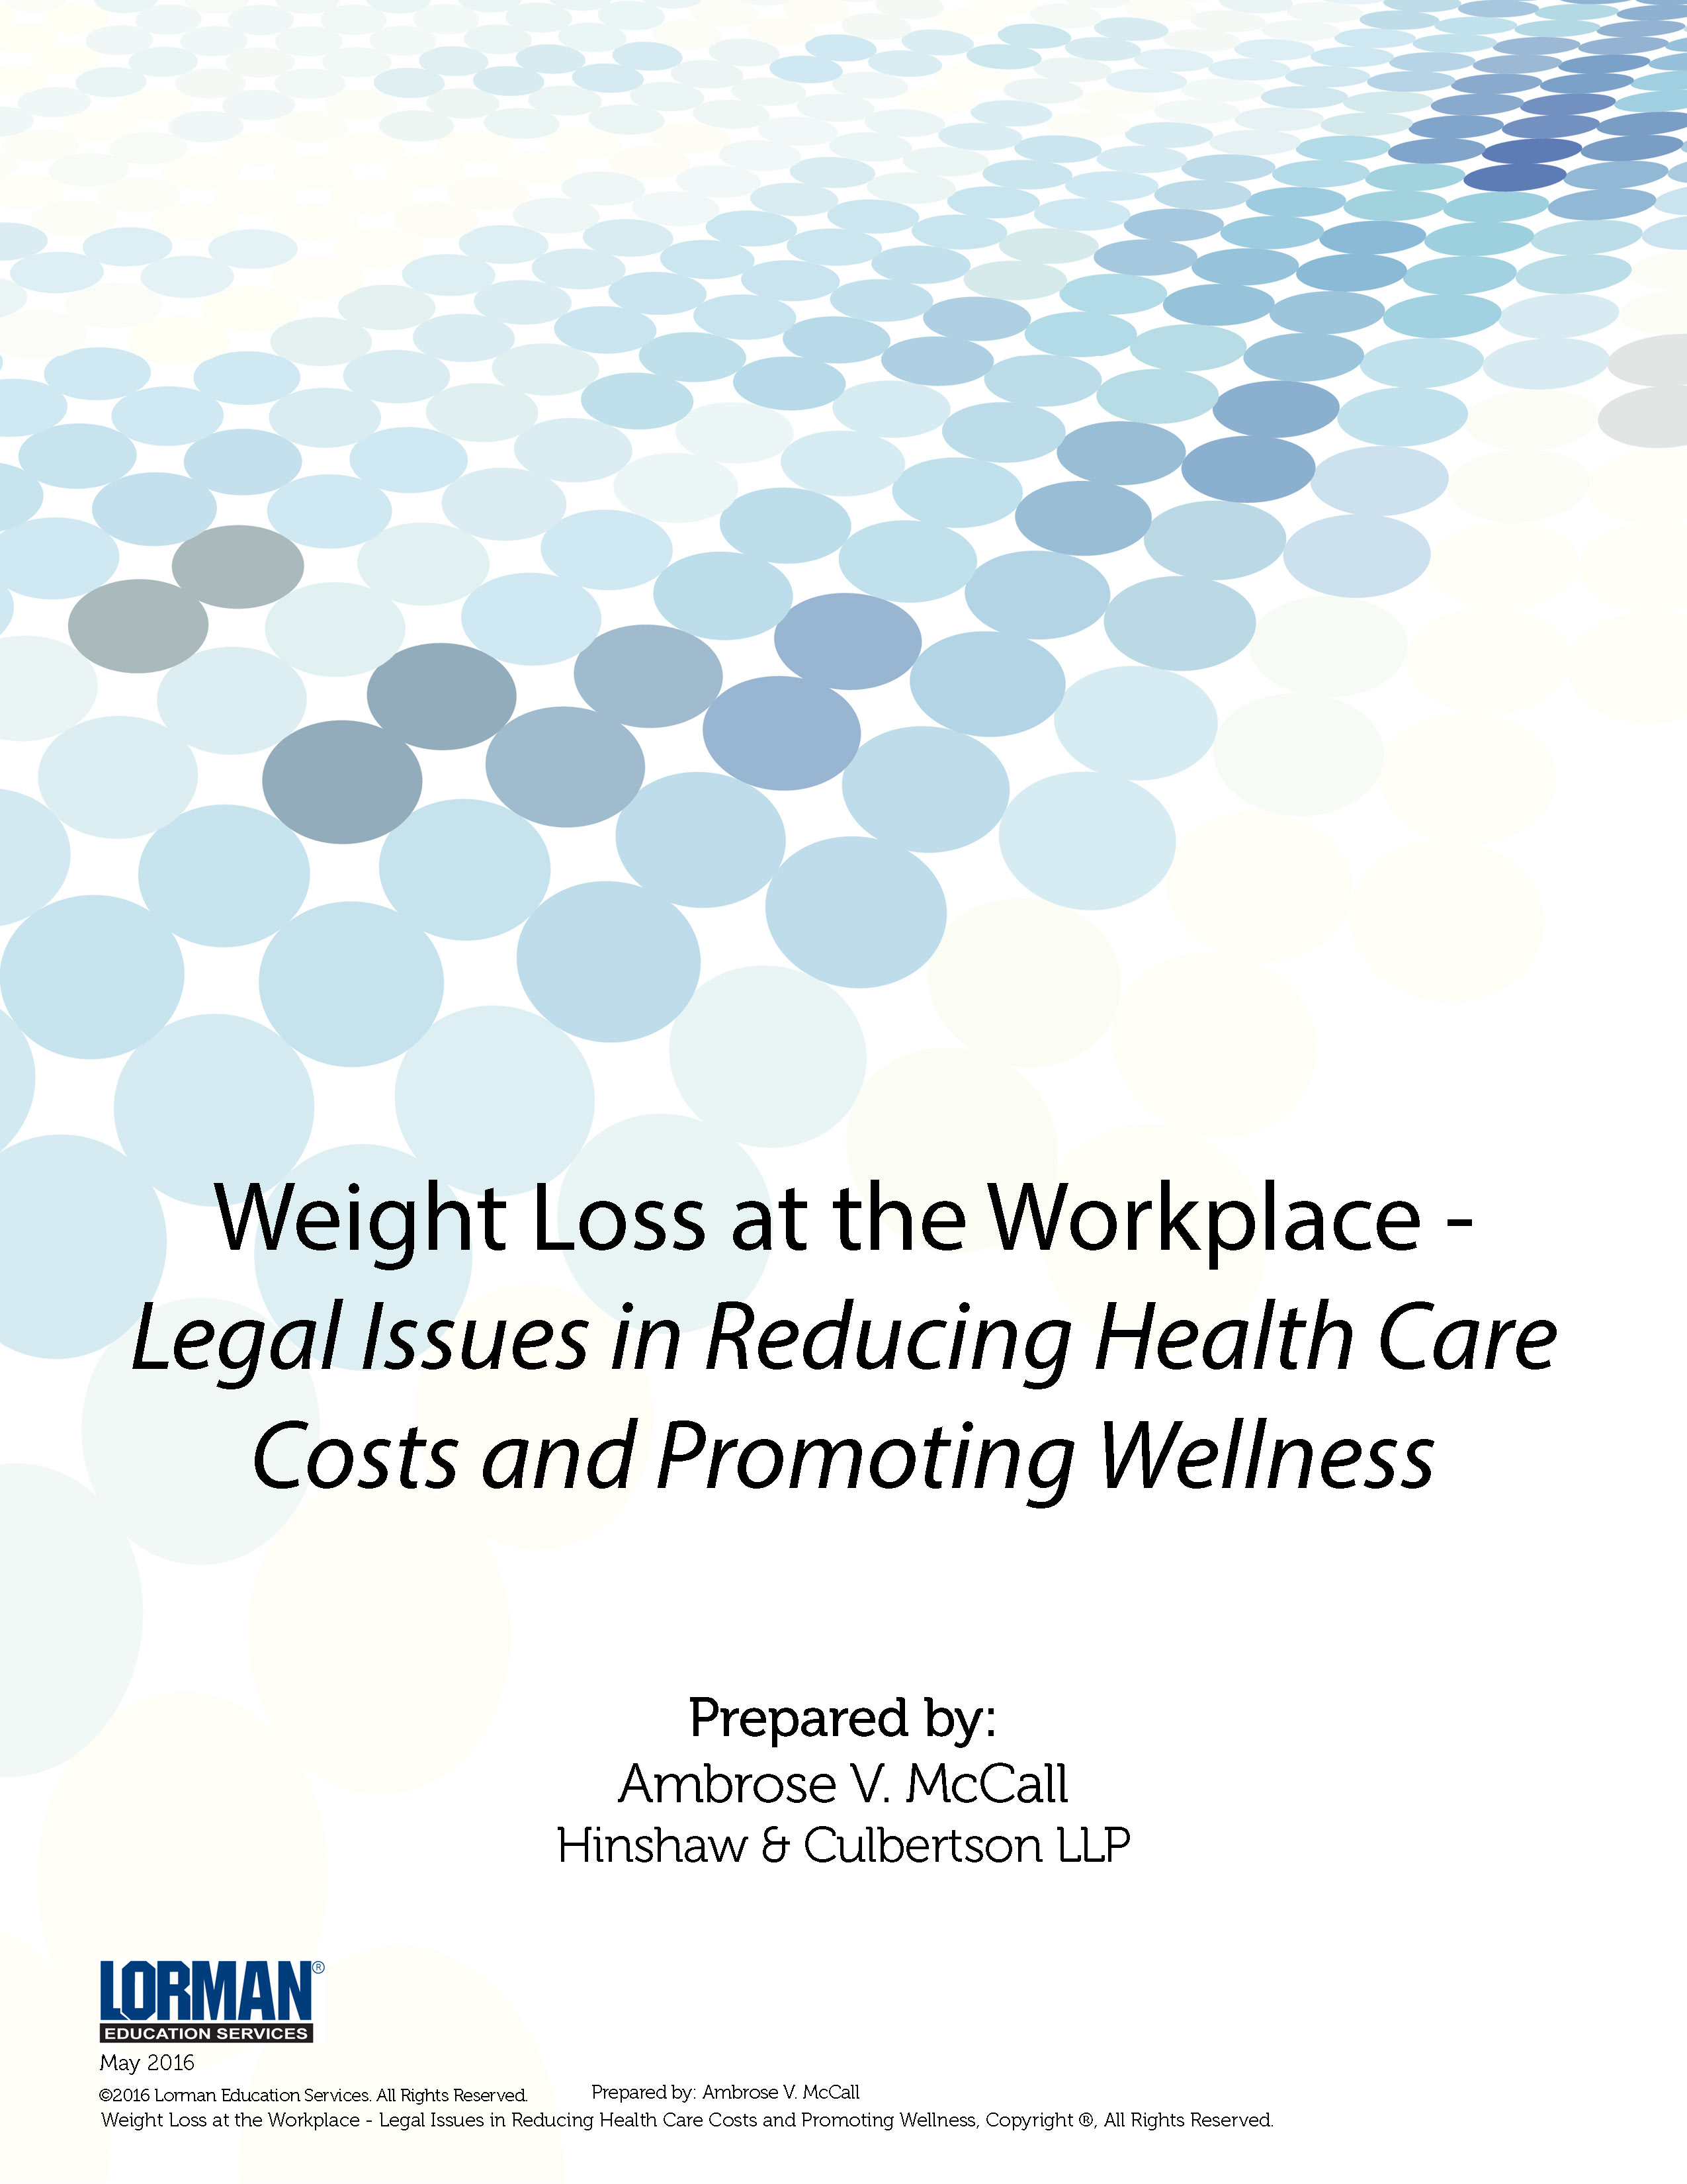 Weight Loss at the Workplace - Legal Issues in Reducing Health Care Costs and Promoting Wellness